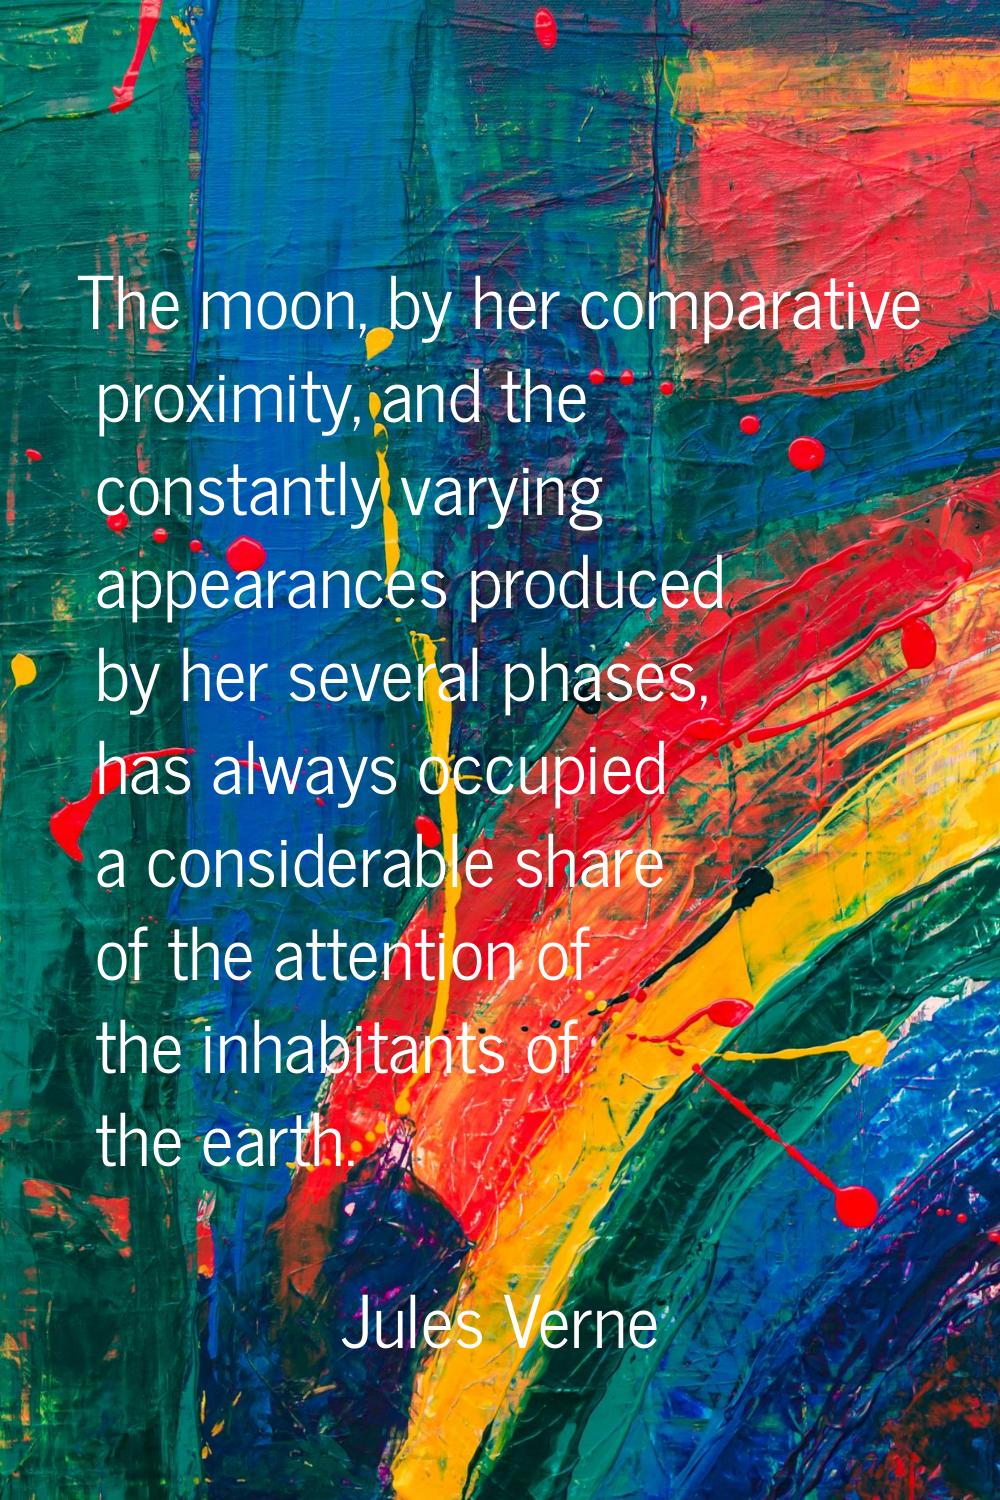 The moon, by her comparative proximity, and the constantly varying appearances produced by her seve